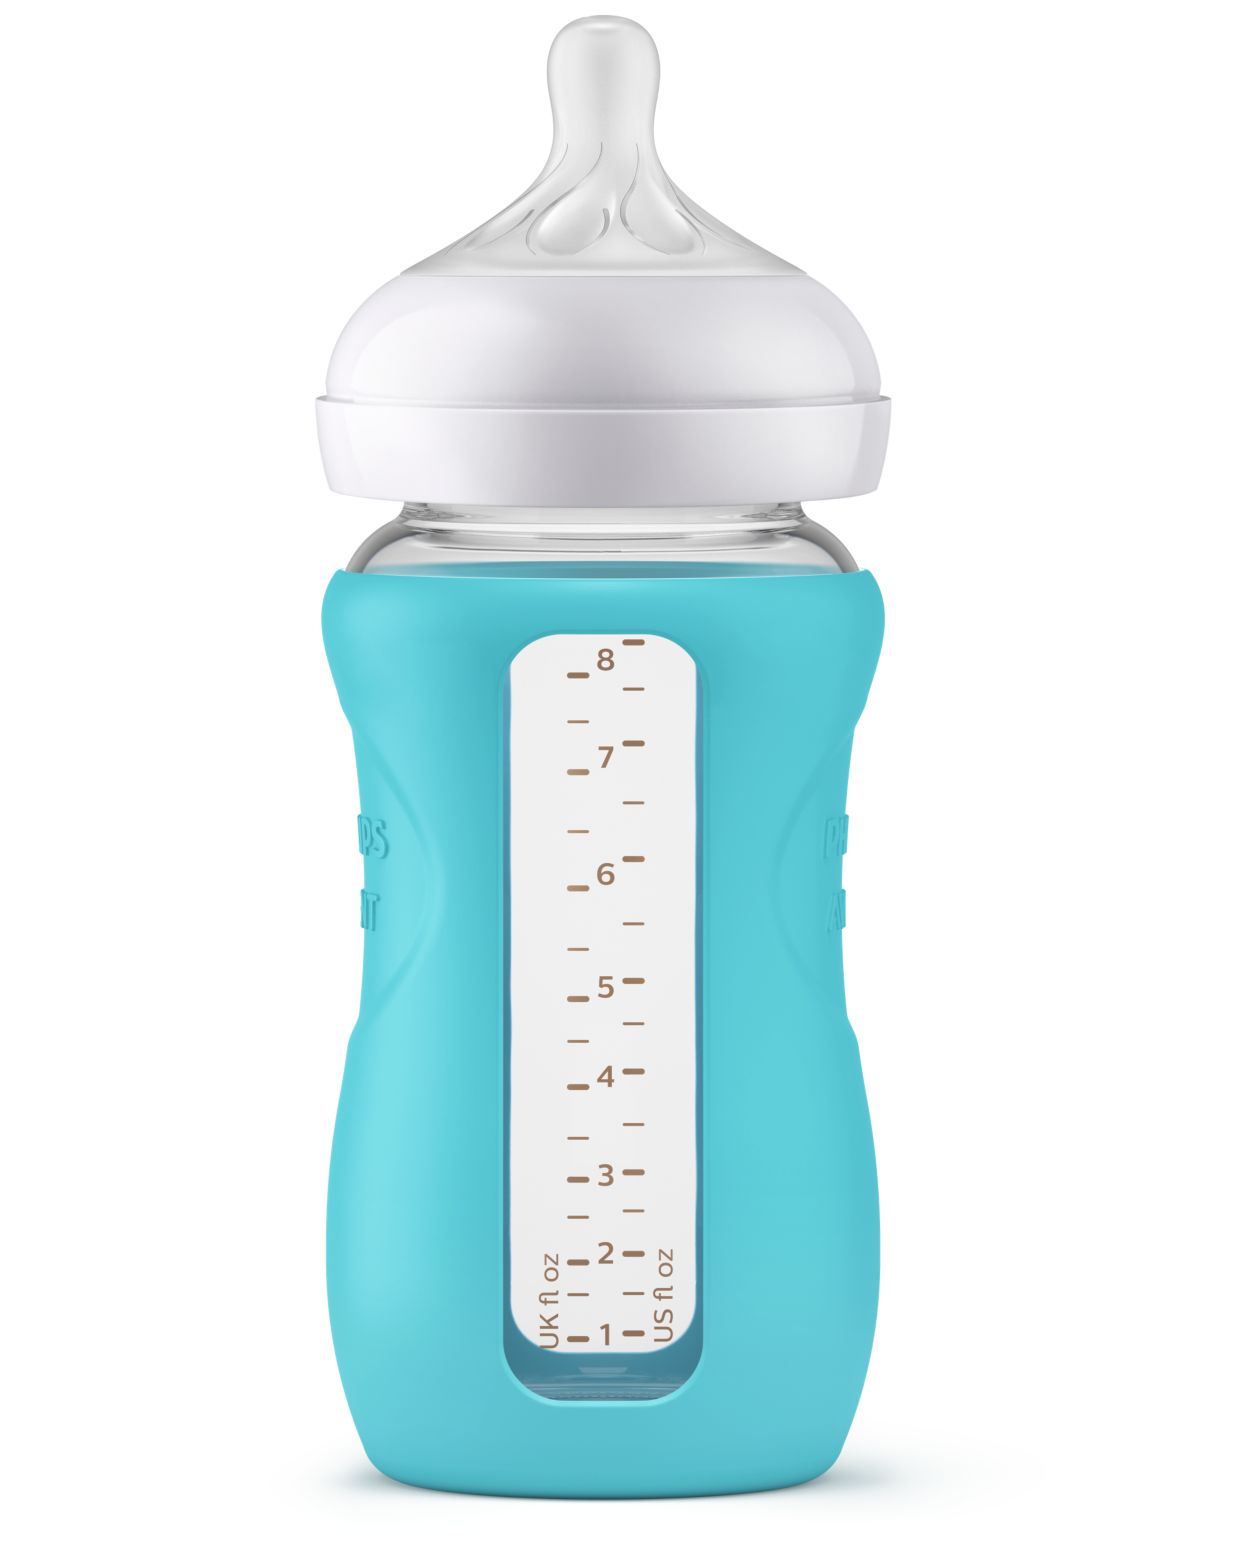 Philips Avent Natural Response Pure Glass Baby Bottle 1m+ 240ml (8.0 oz)